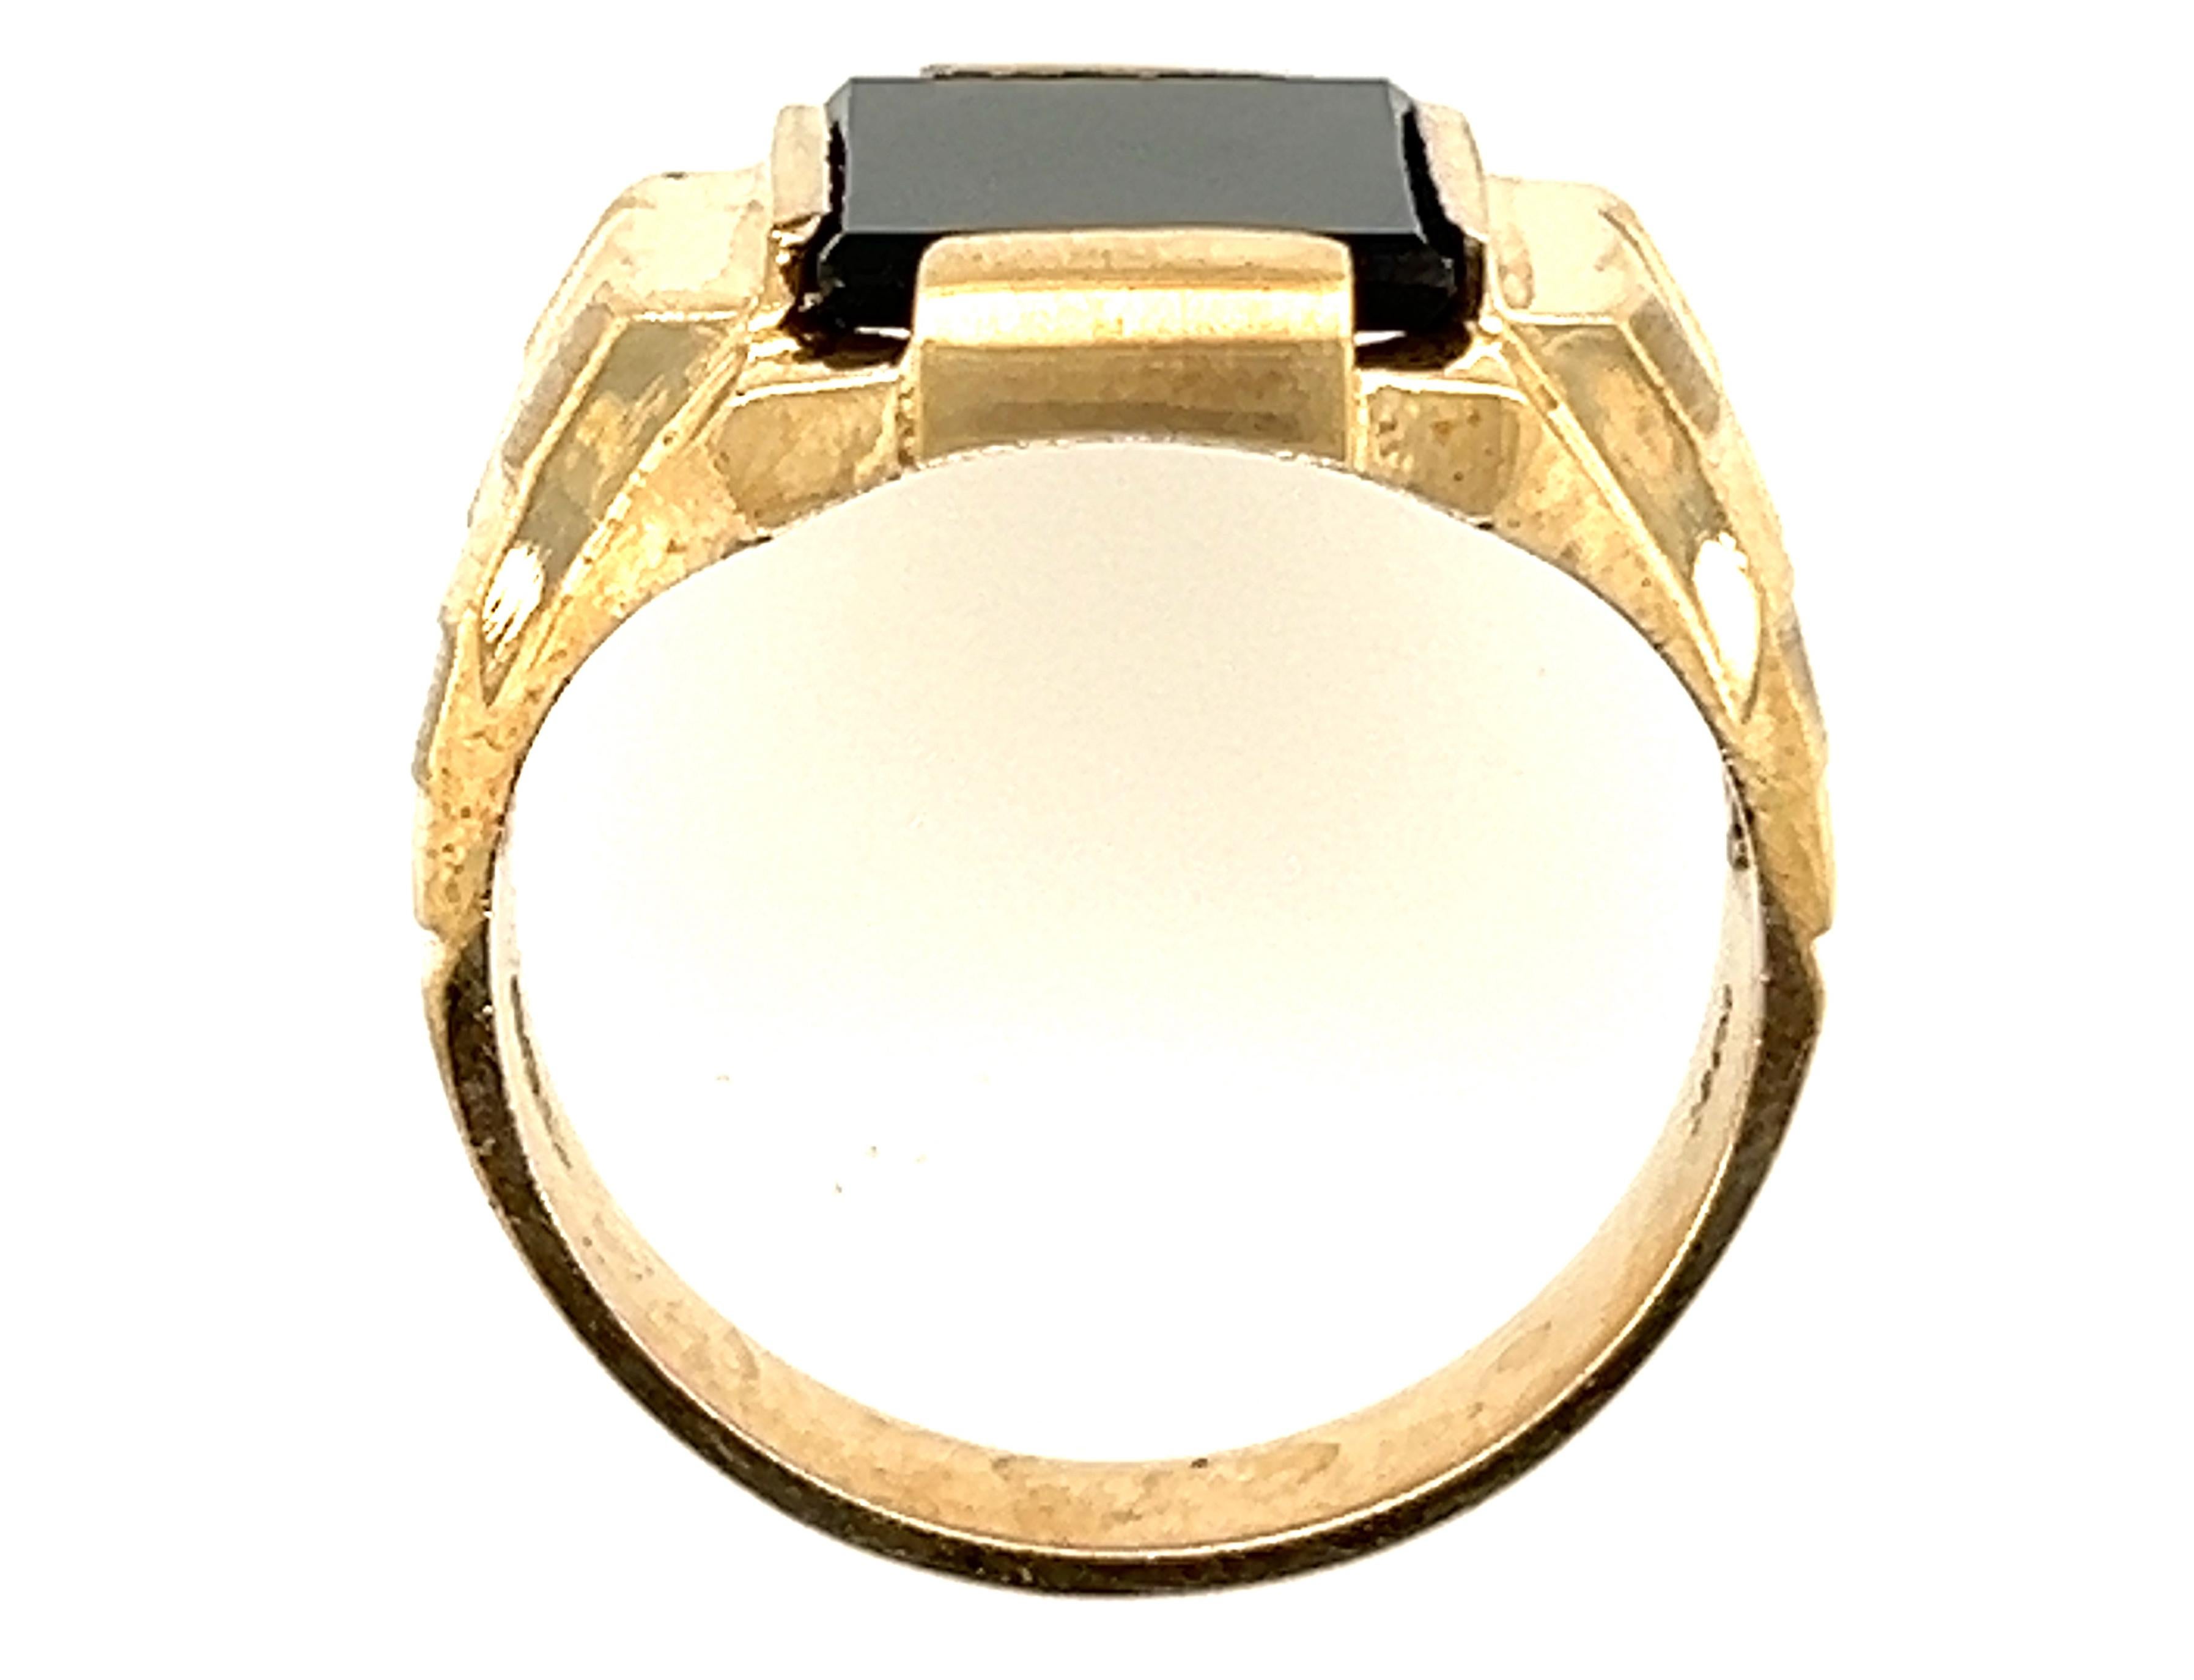 Genuine Original Antique from 1940s-1950s NOS Mens Retro Onyx Yellow Gold Cocktail Ring

 

Features a 11 x 9 mm Genuine Onyx Gemstone

Never Worn, Never Sold. Purchased from Retired Jewelers Grandson. Extremely Rare Pieces  Referred to as 